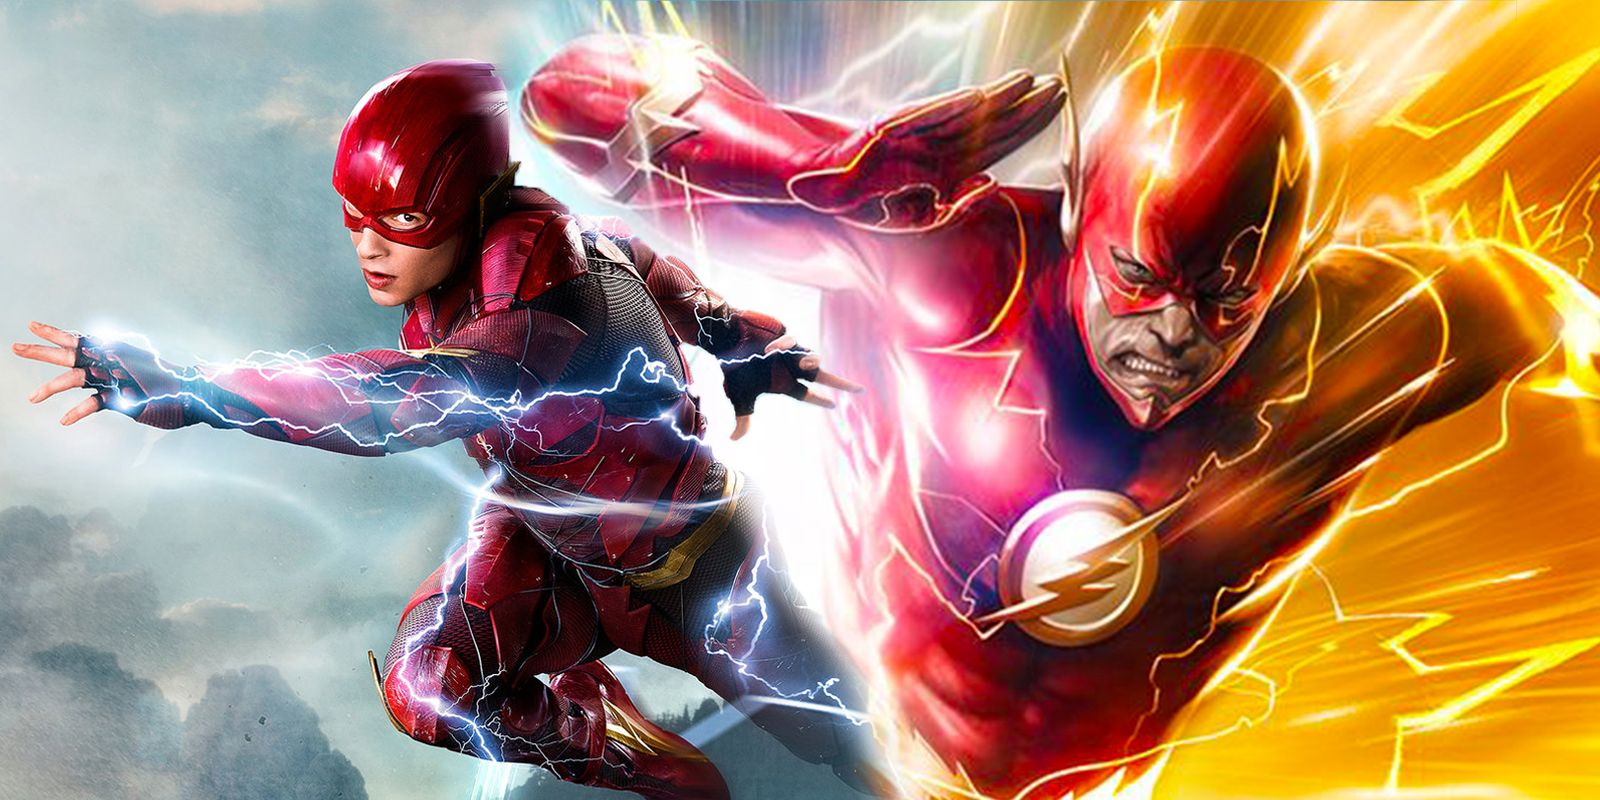 Ezra Miller as Barry Allen and Flash from the comics in the Speed Force